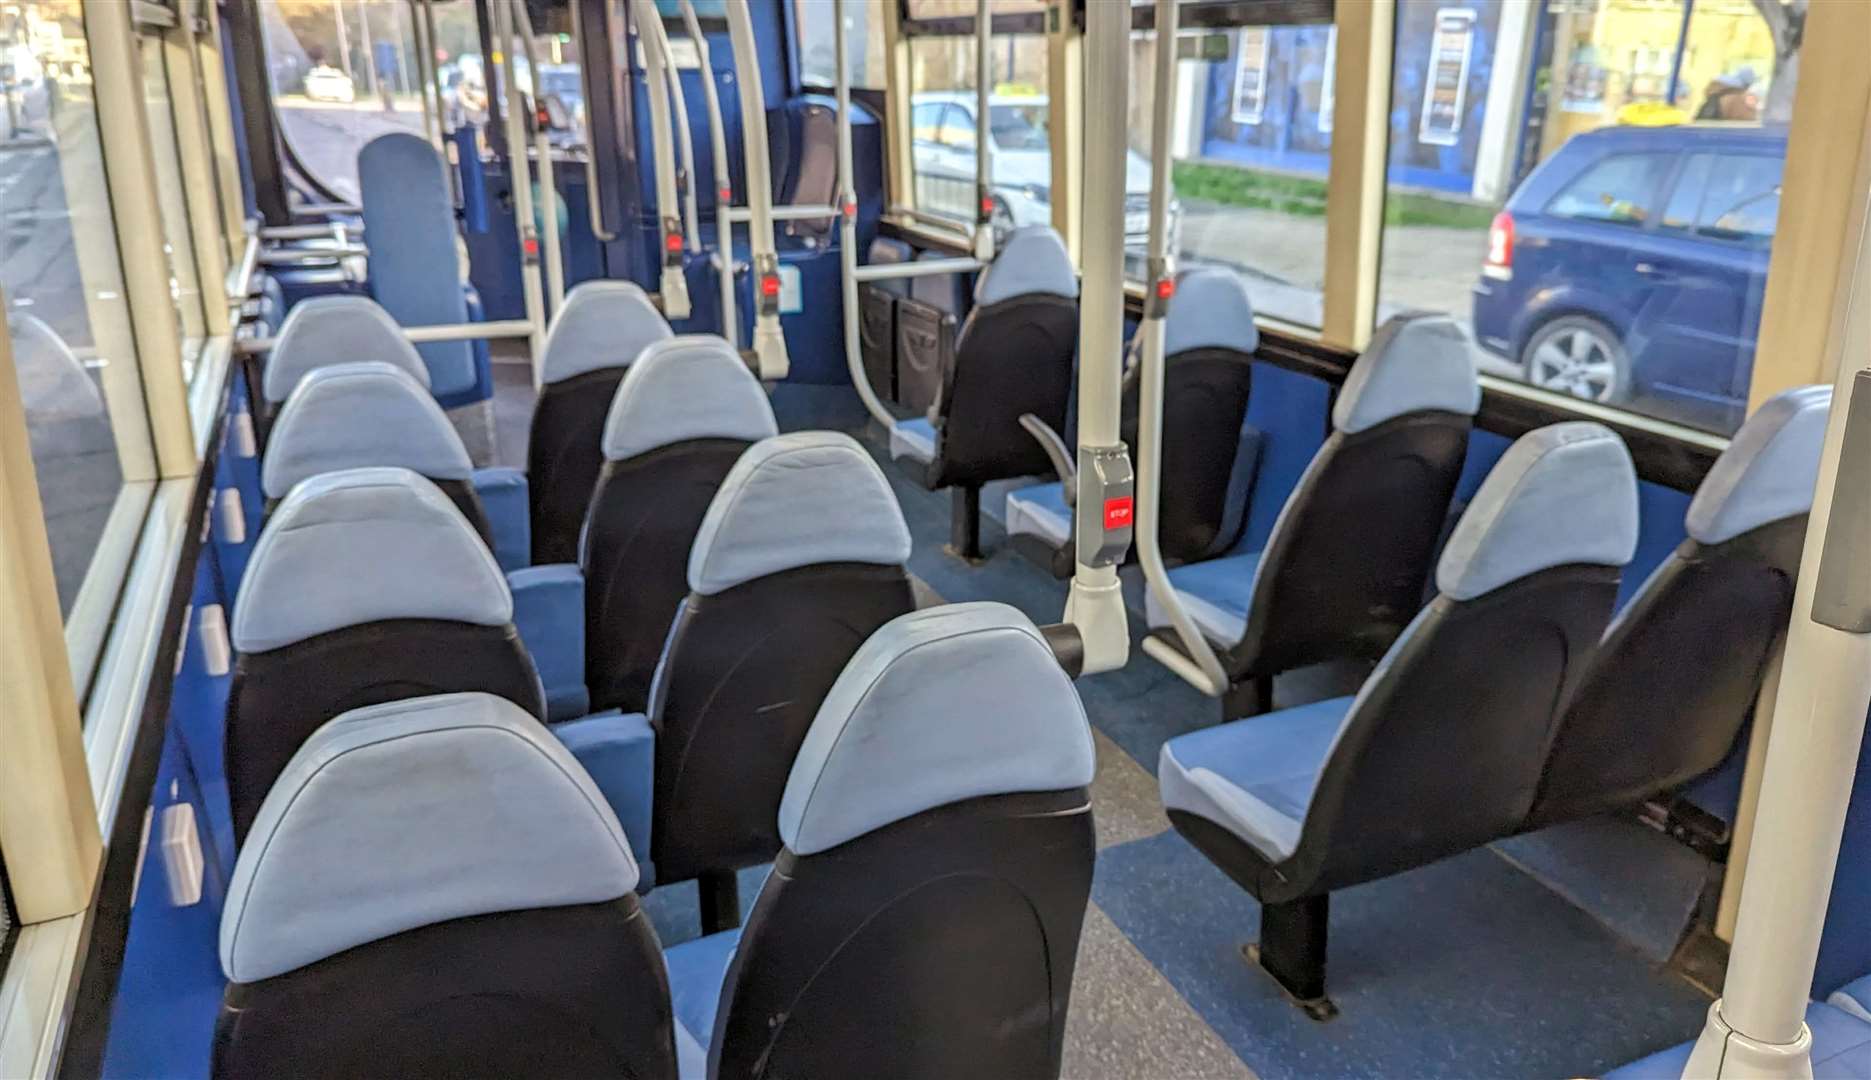 Our reporter was the only passenger on board as the bus left Gravesend